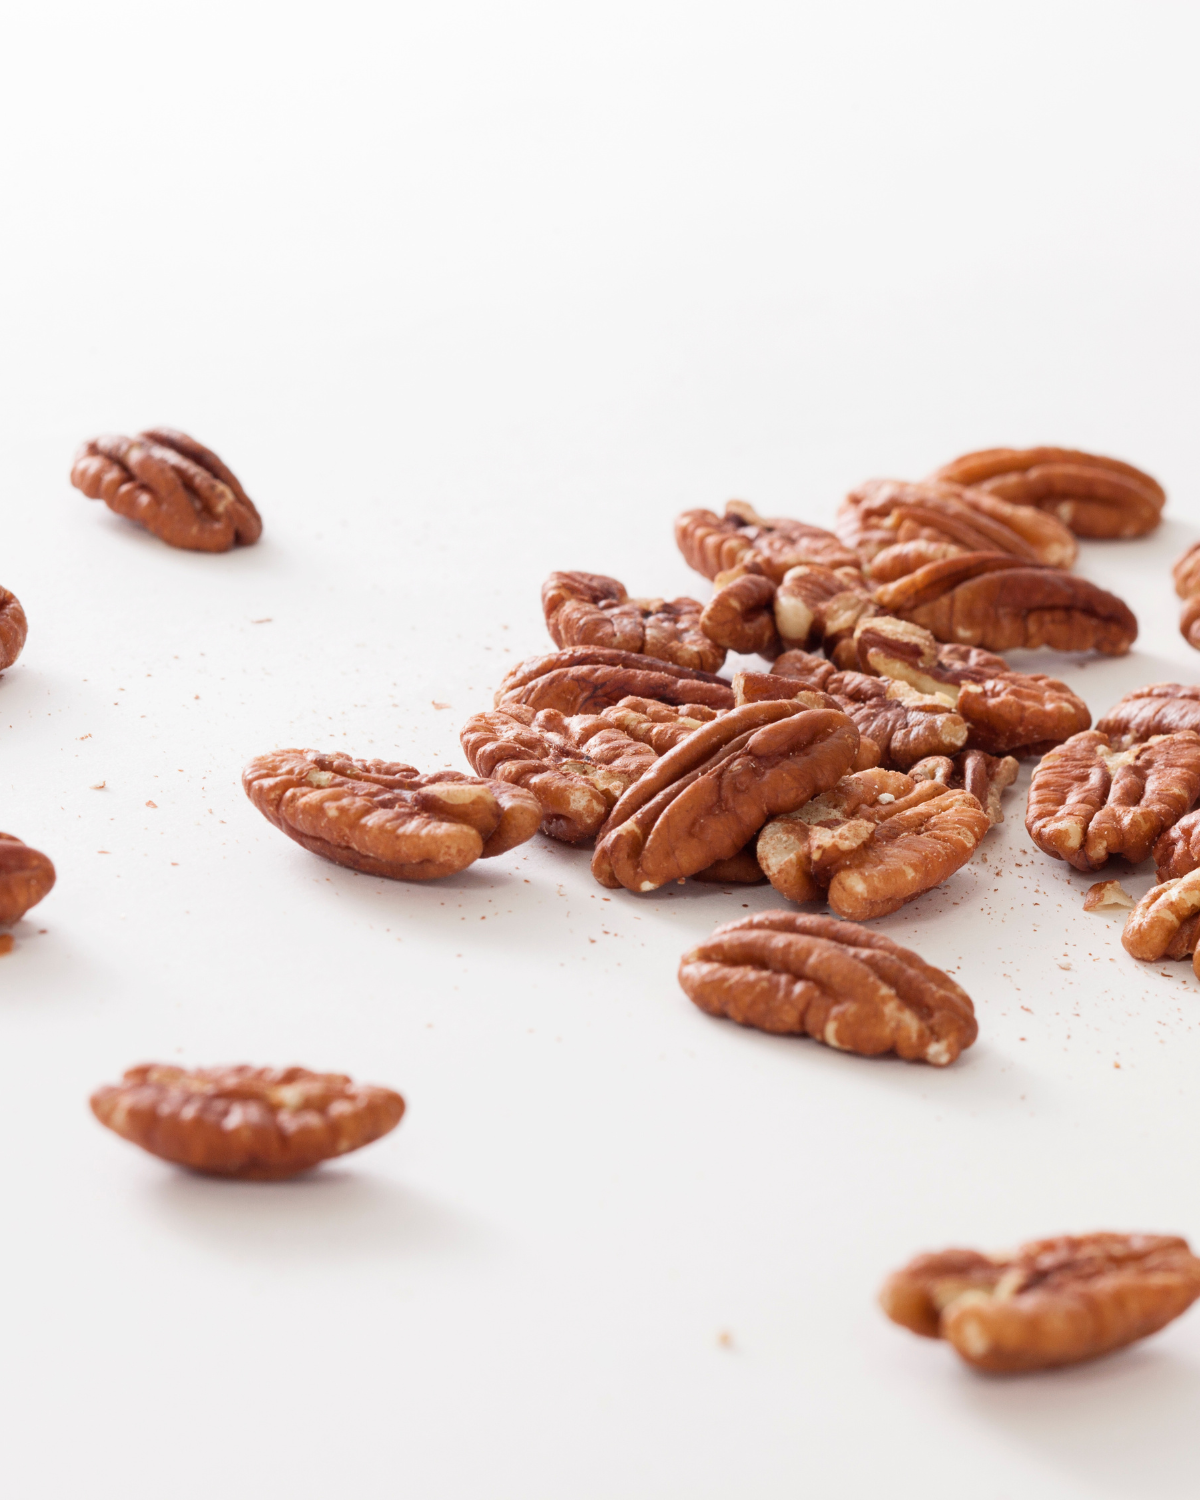 pecans for the cookies.